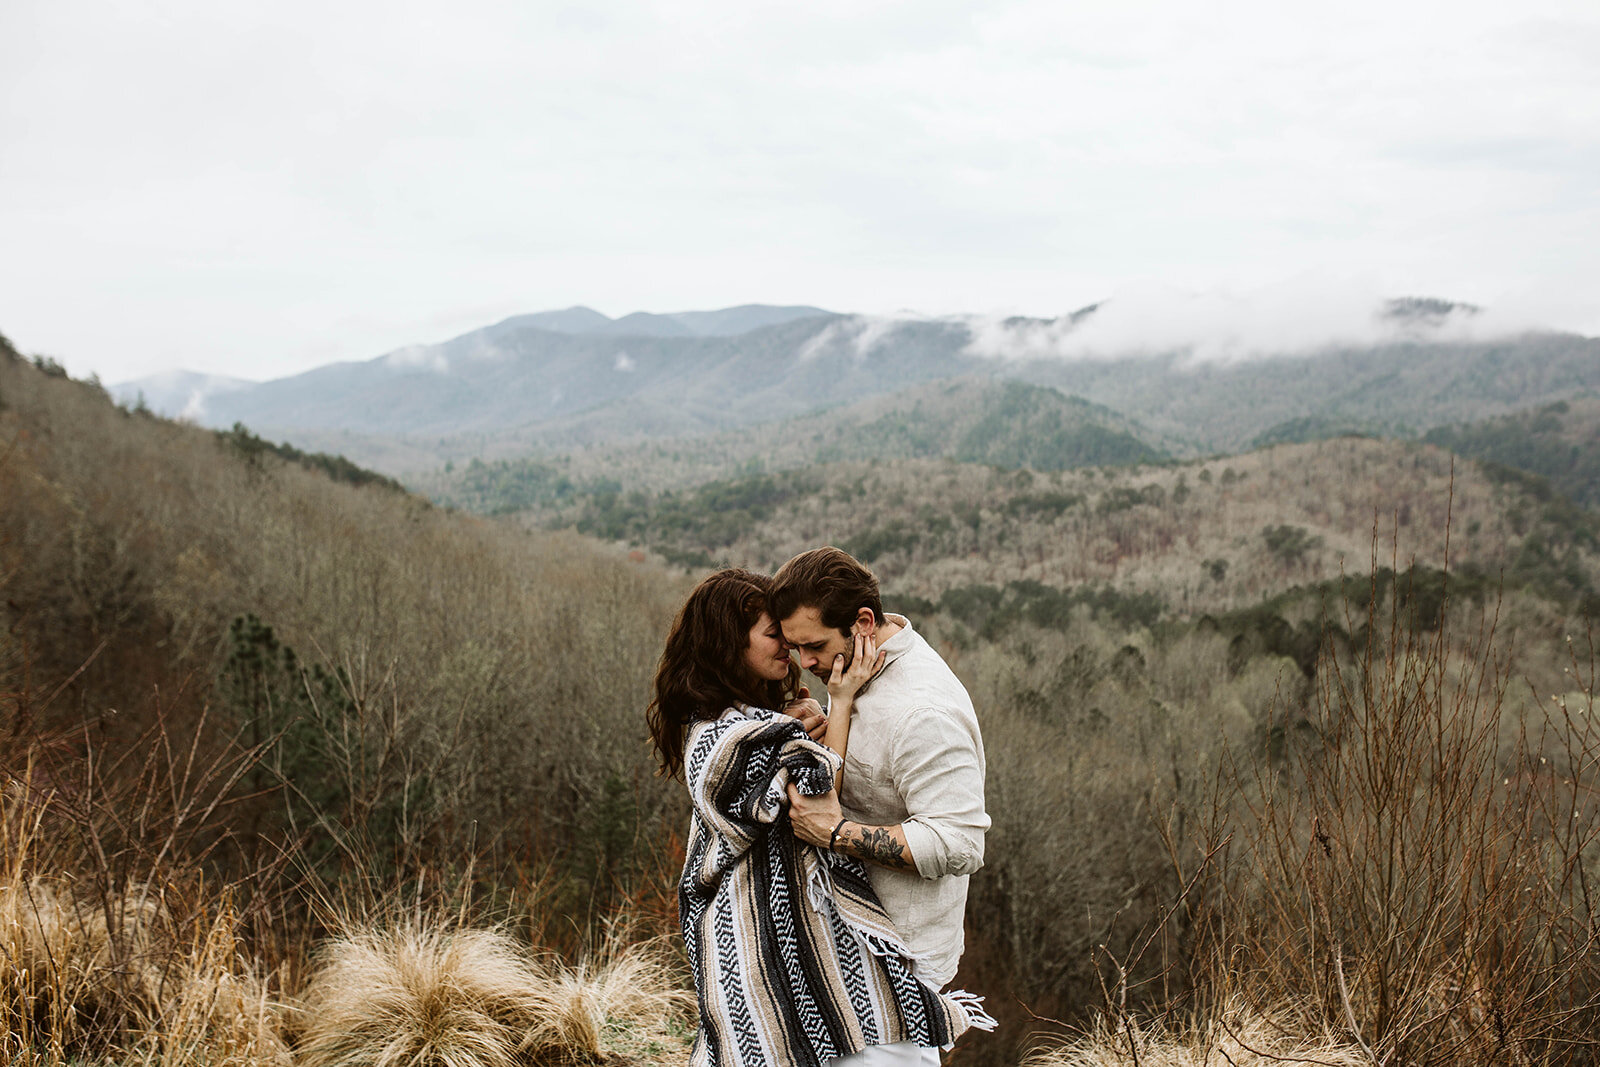 adventure-engagement-in-the-great-smoky-mountains-chattanooga-elopement-photographer5Y6A5770_websize.jpg